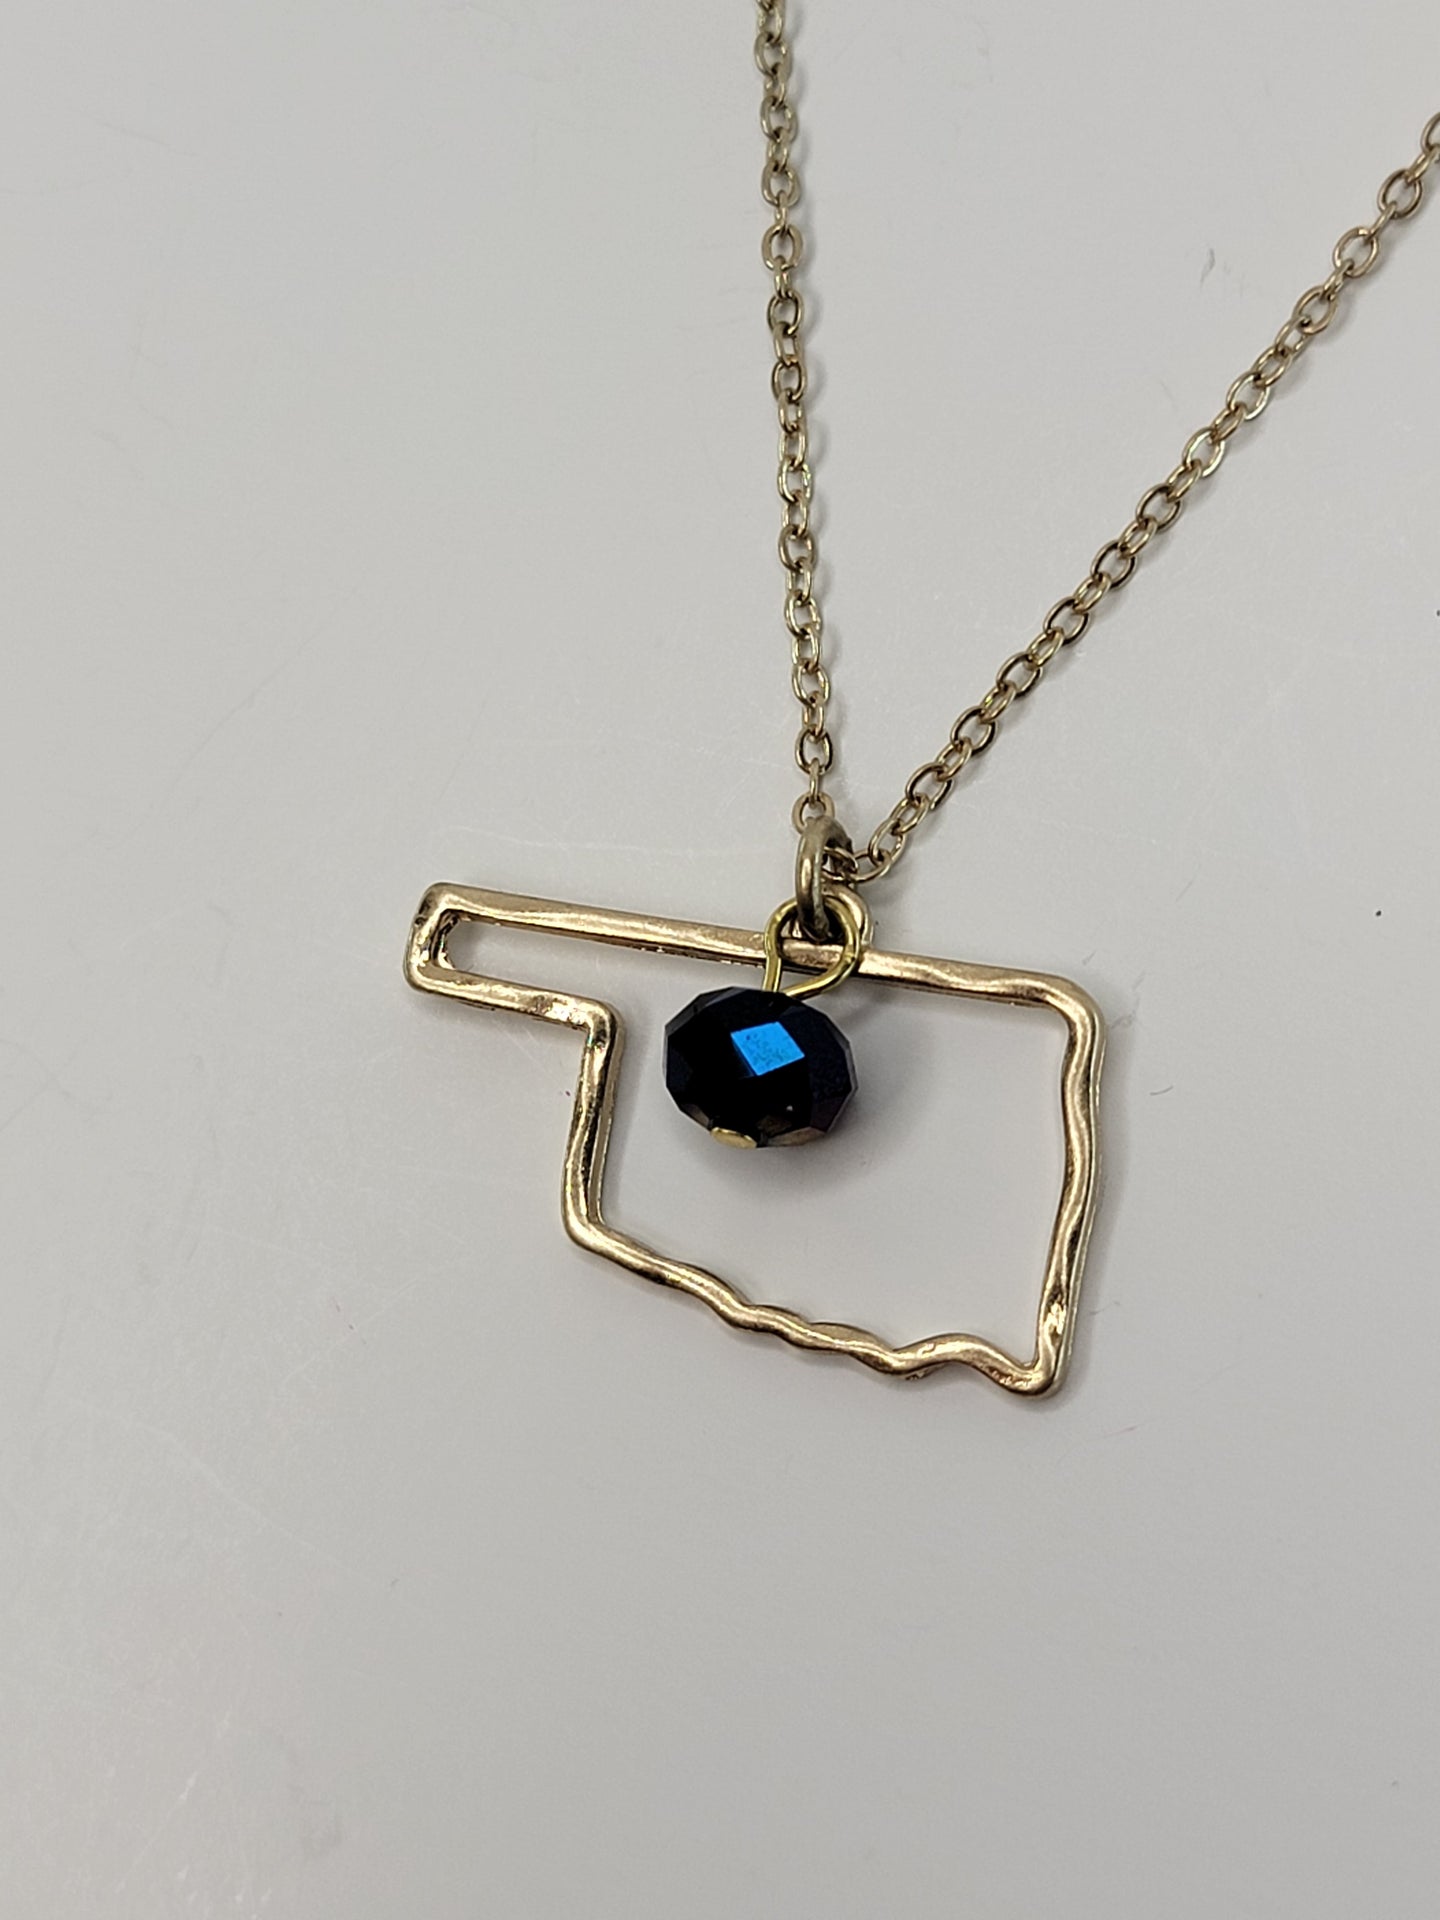 Gold Oklahoma Outline Necklace - Blue Crystal